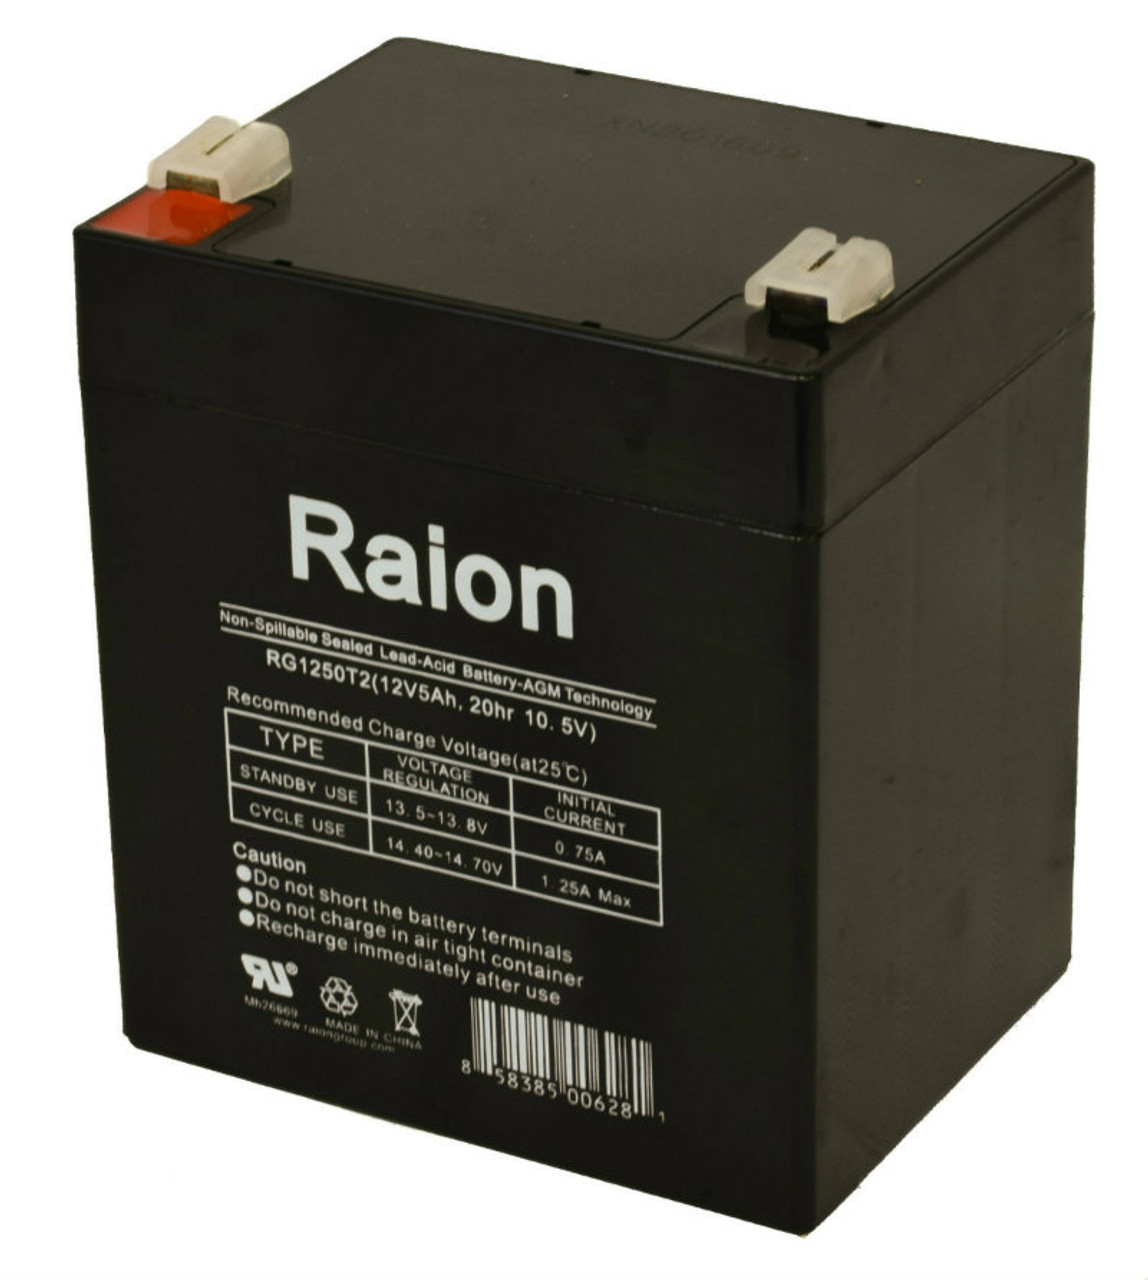 Raion Power RG1250T1 Replacement Battery for Litton PM2-A EKG Monitor